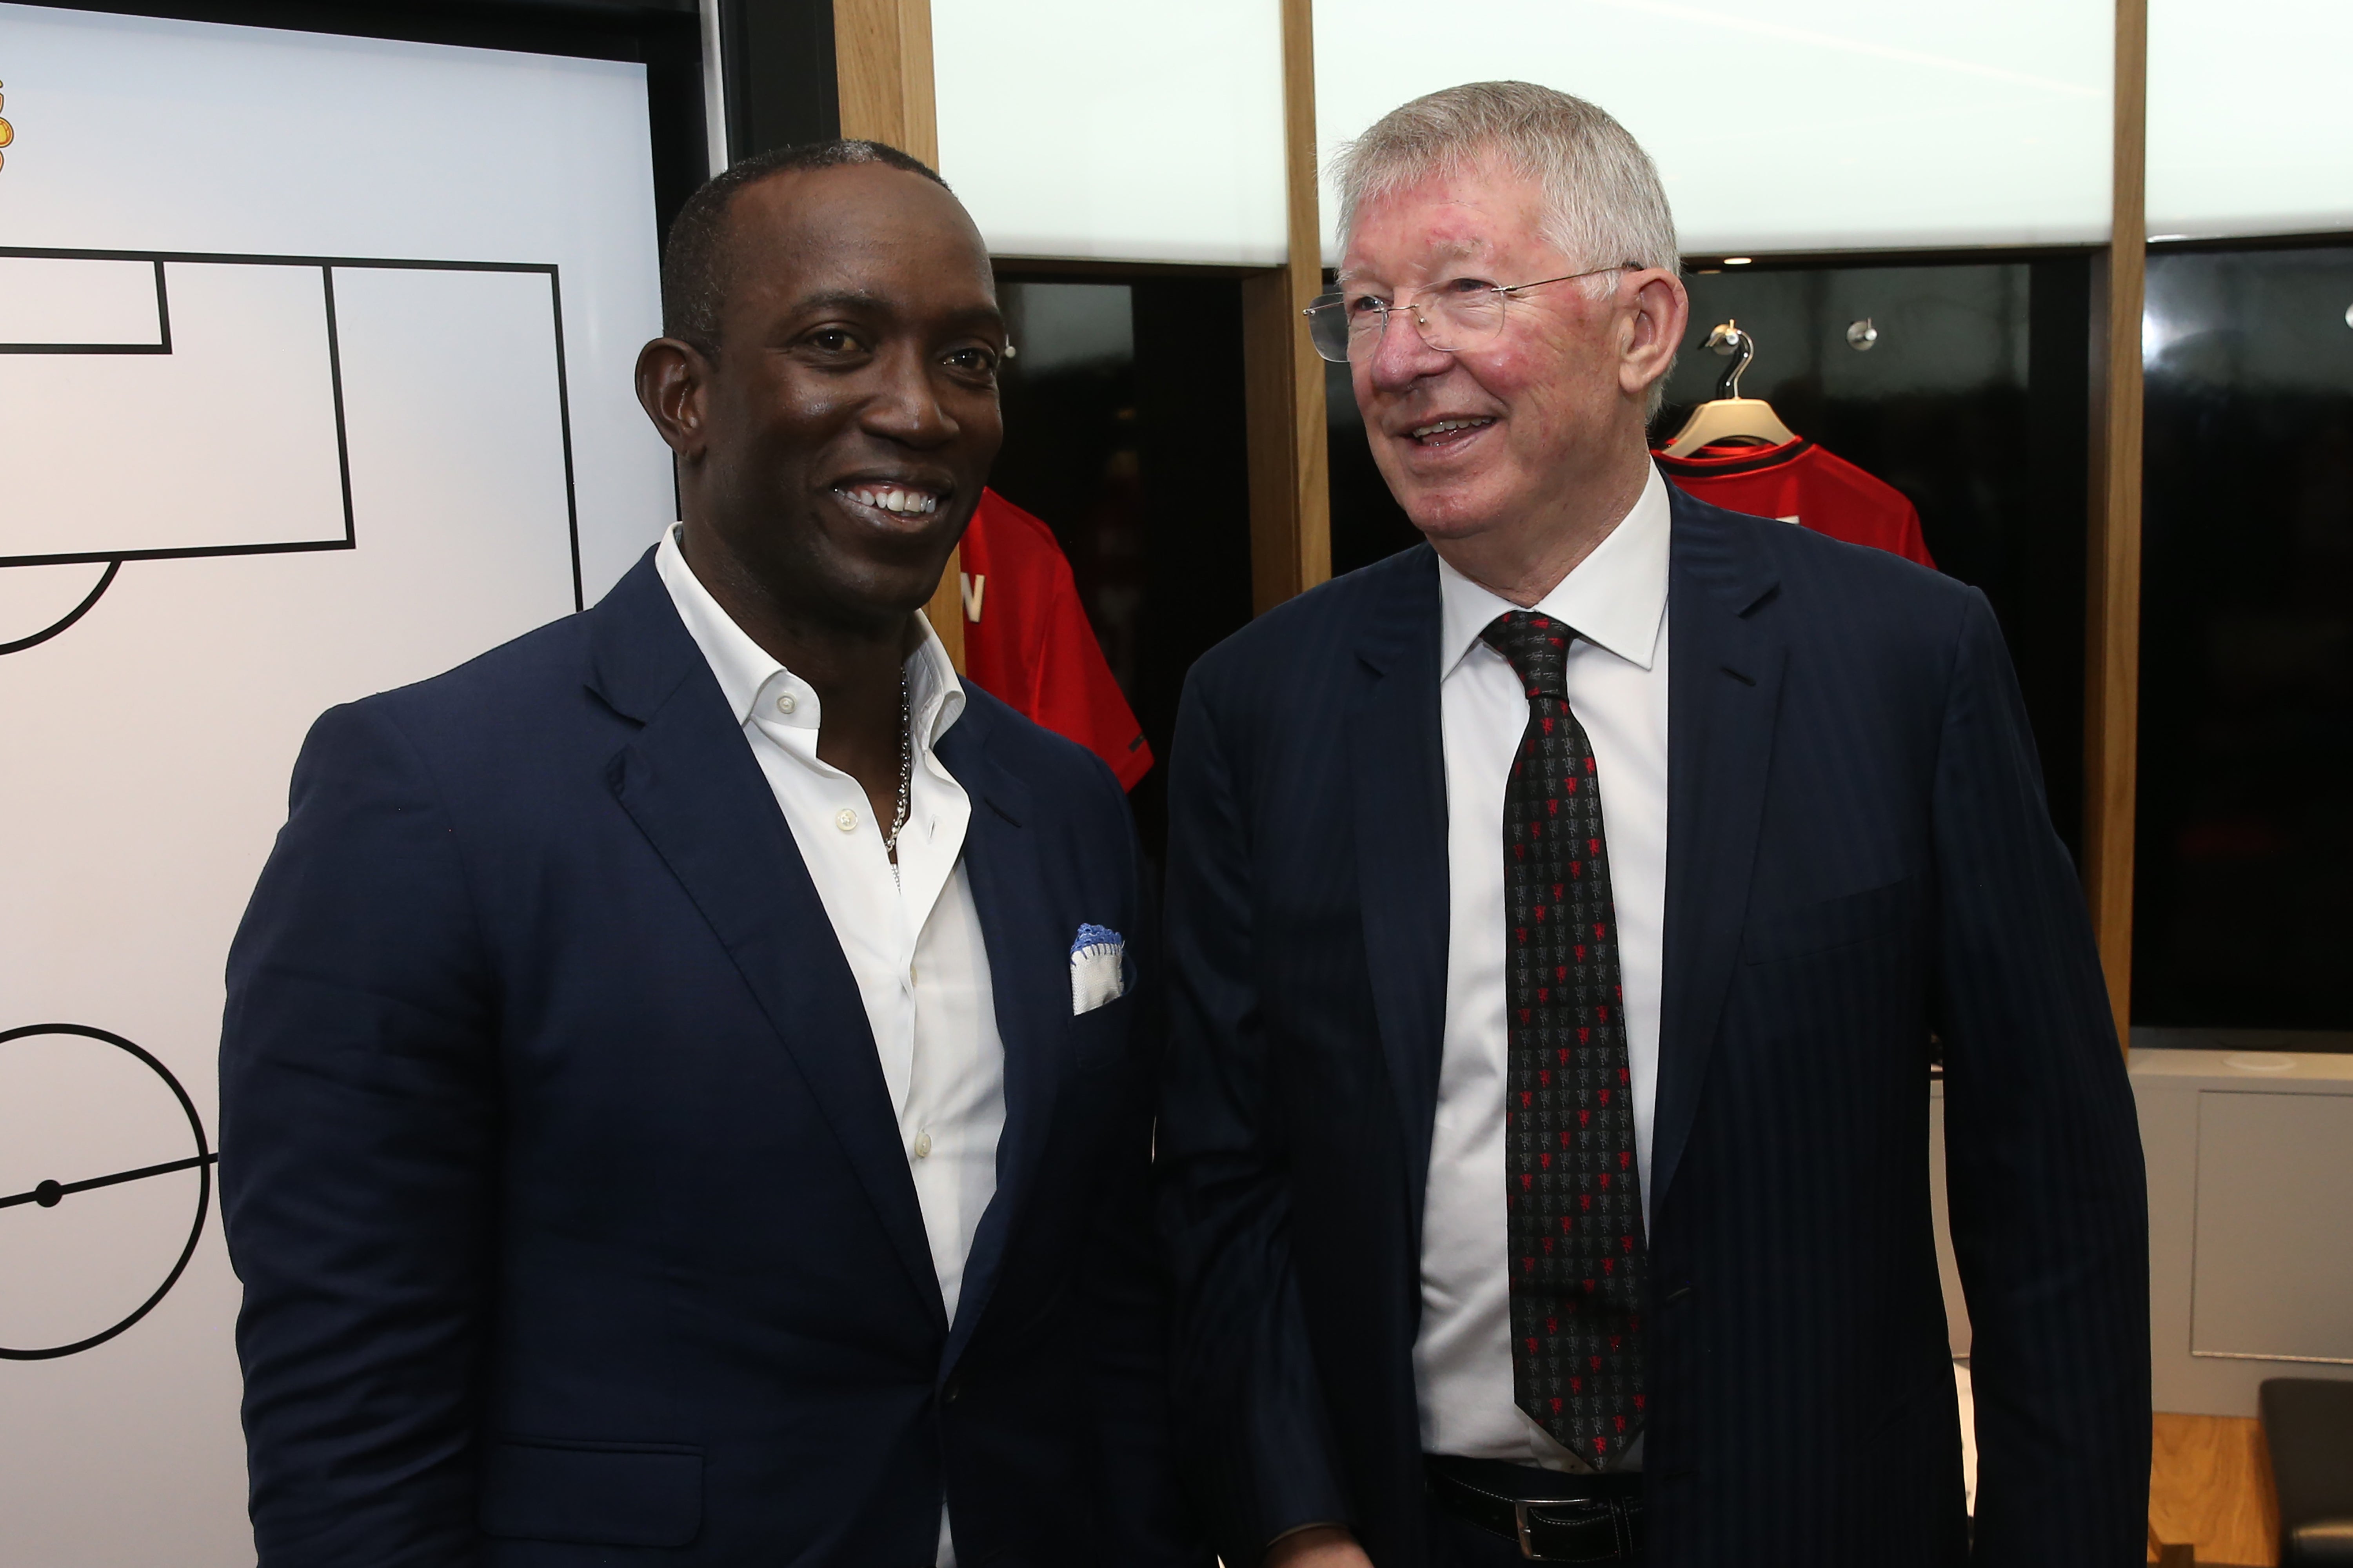 Dwight Yorke and Sir Alex Ferguson reminisce about old times ahead of the documentary’s release.